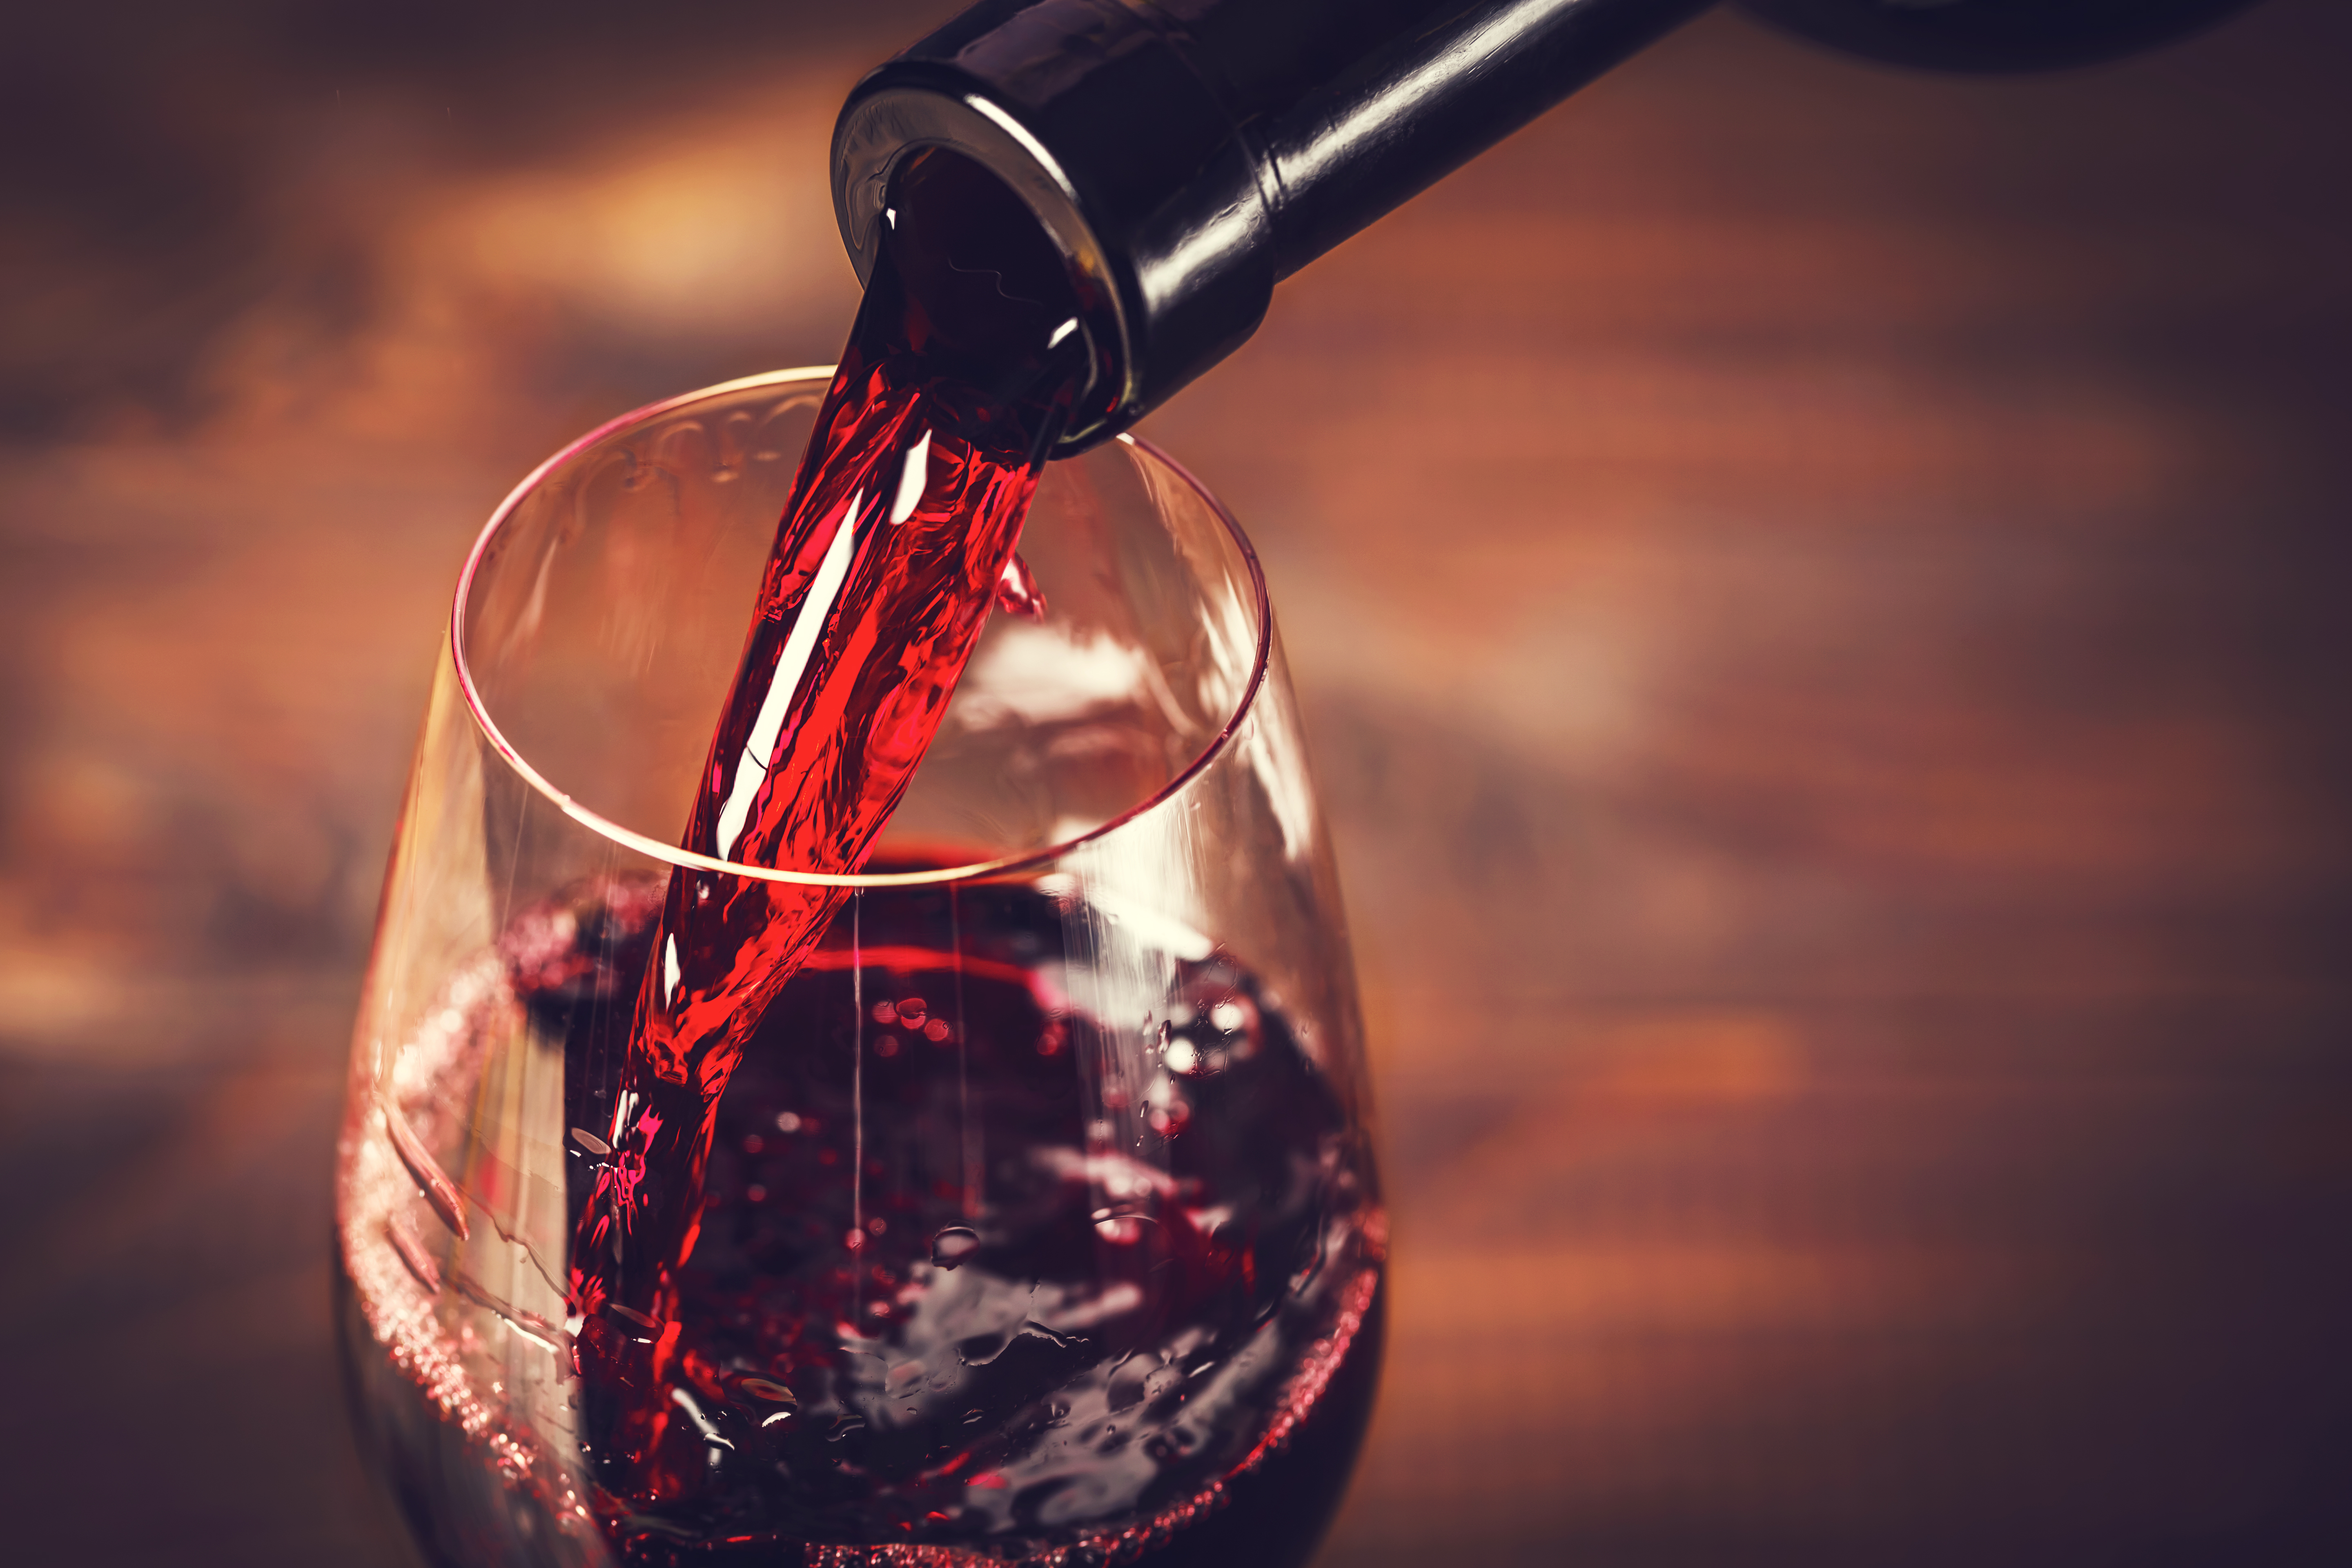 A bottle pouring red wine into a glass